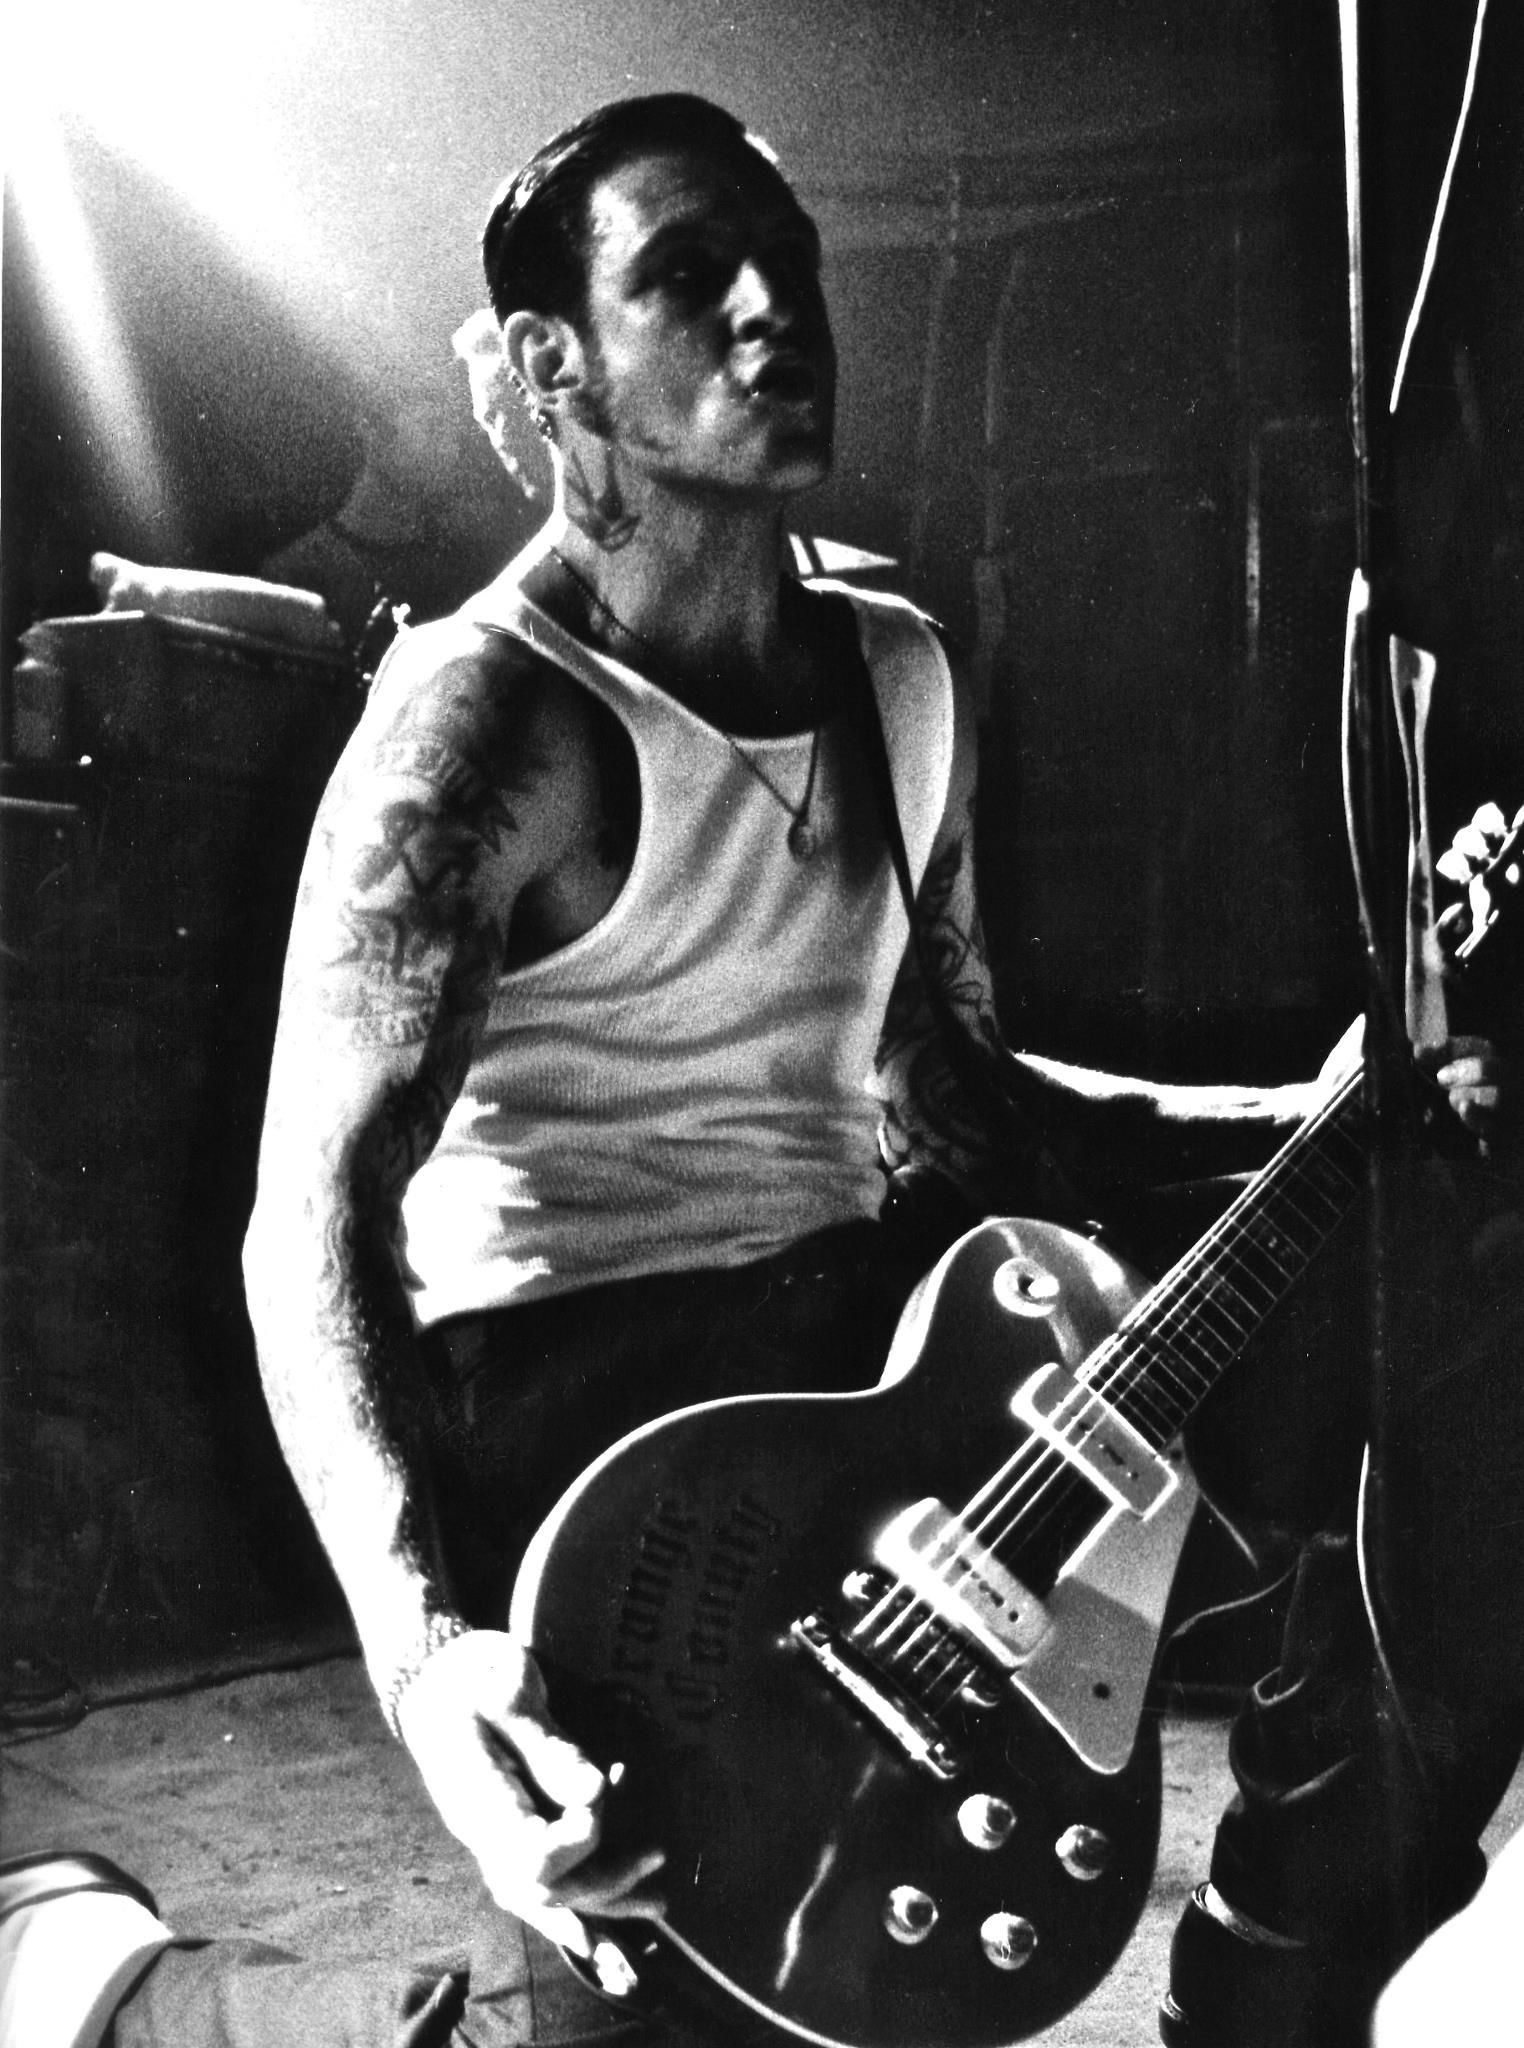 1524x2048 Mike Ness of Social Distortion at The Garage Club in 1996